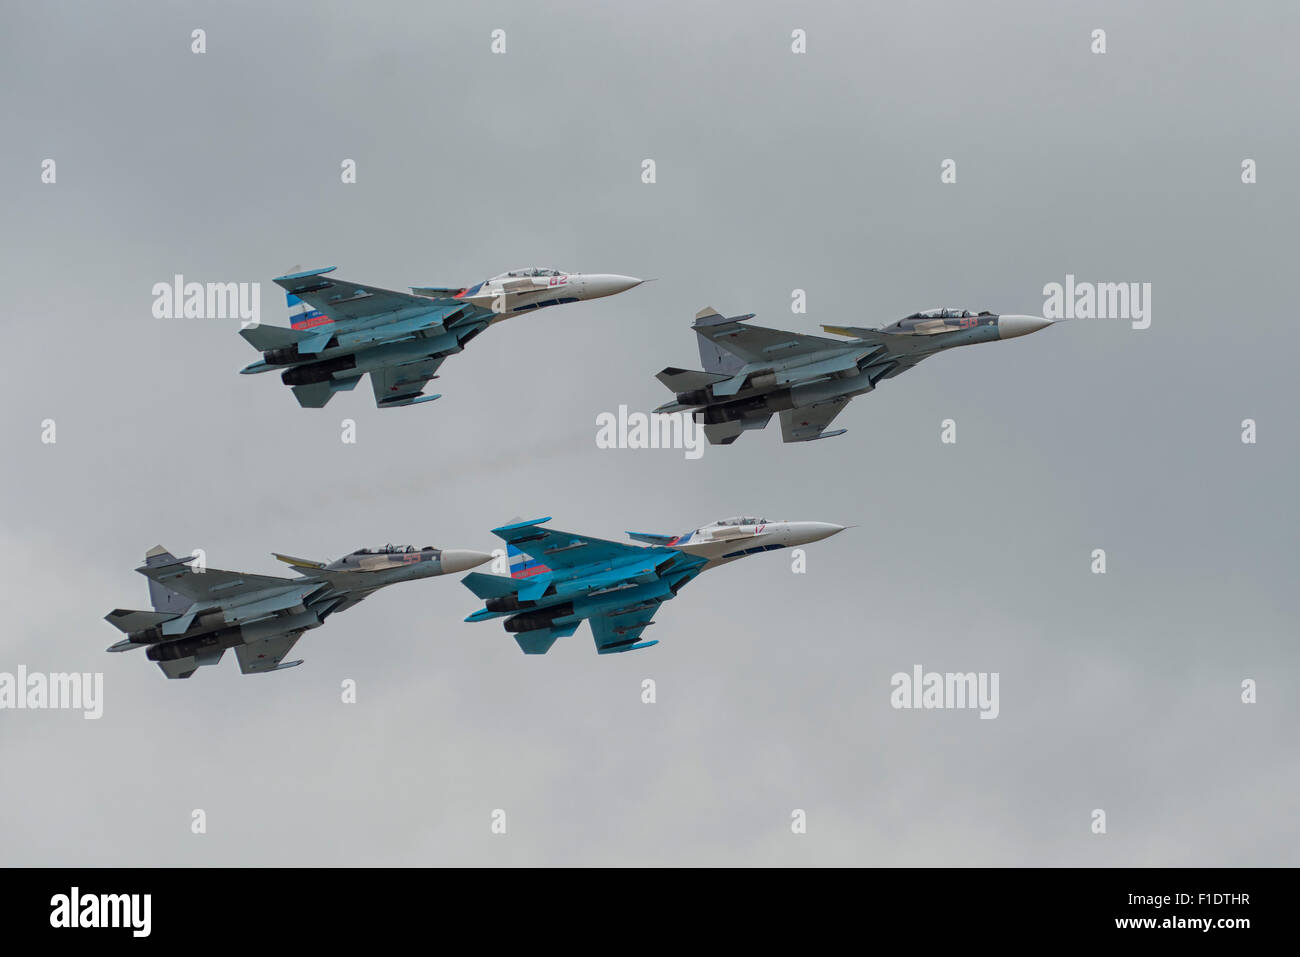 Russian Falcons during MAKS 2015 Air Show in Moscow, Russia Stock Photo